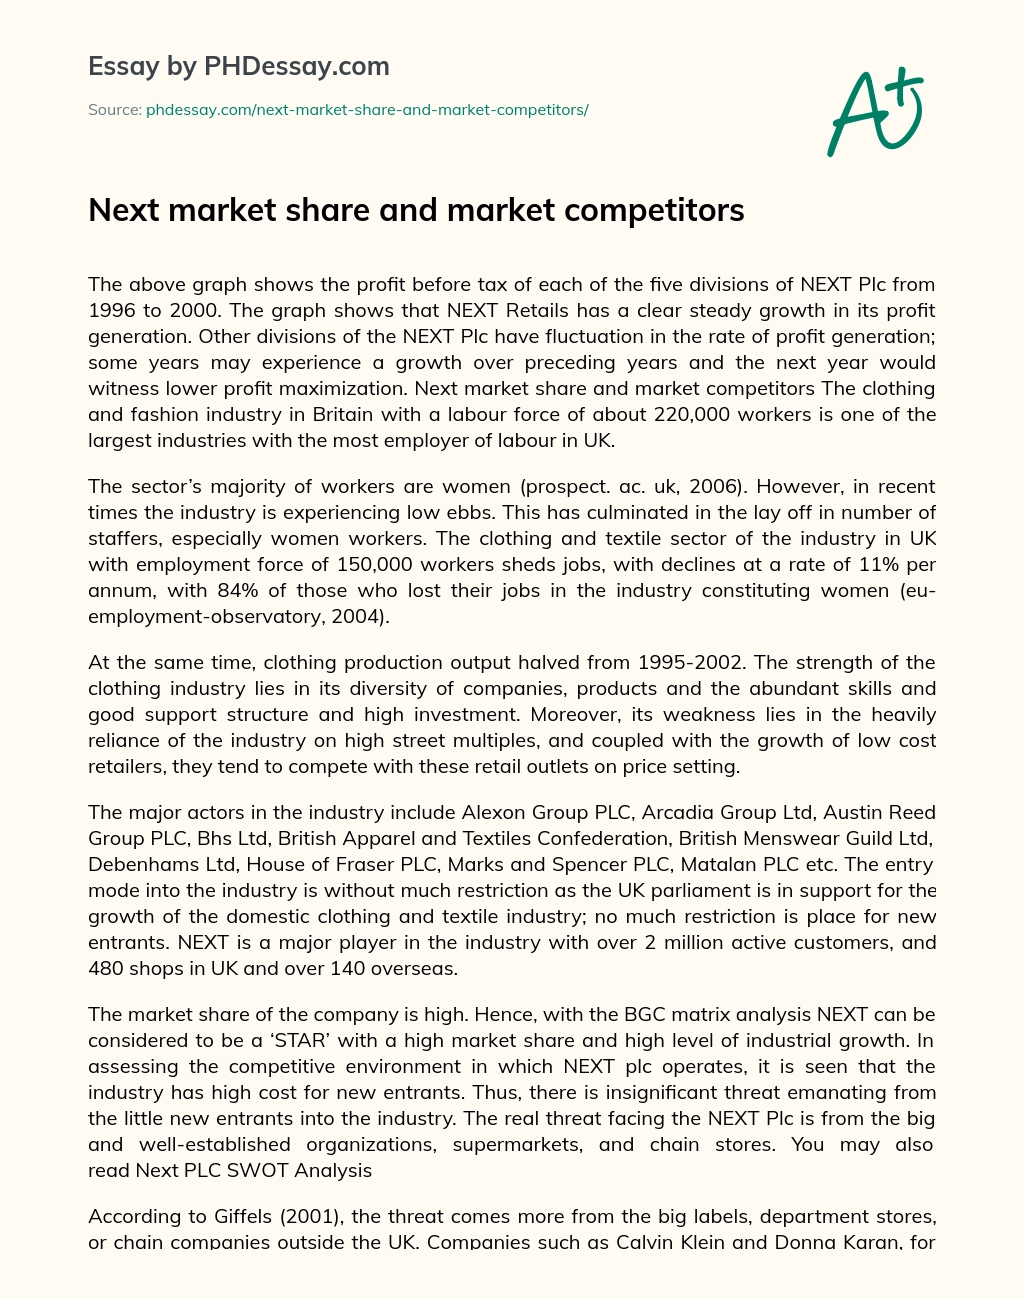 Next market share and market competitors essay